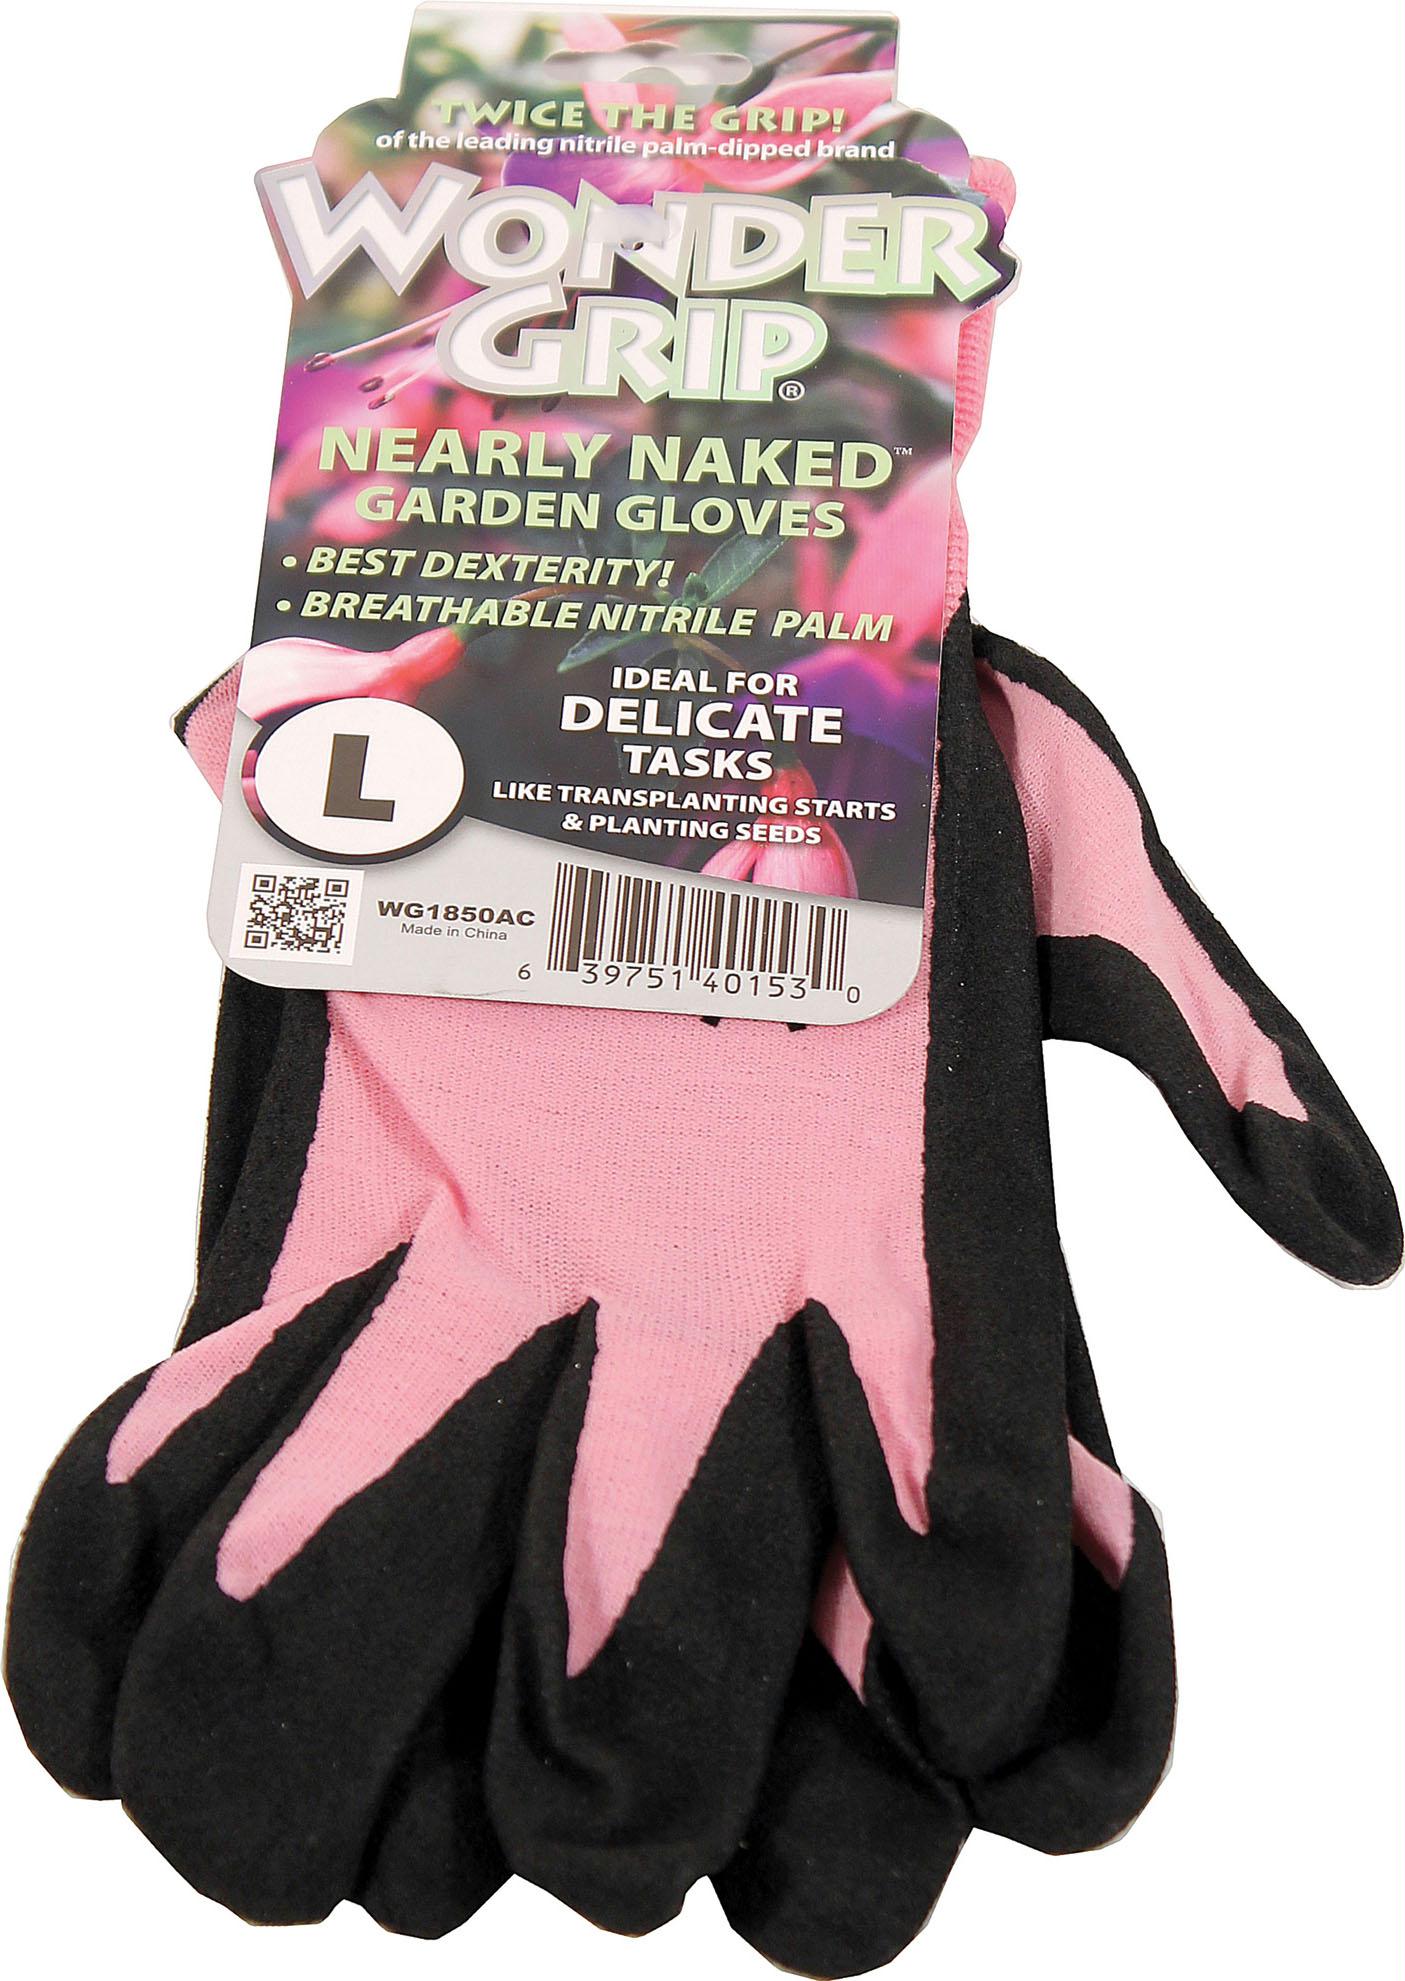 Wonder Grip Nearly Naked Garden Gloves - aomega-products